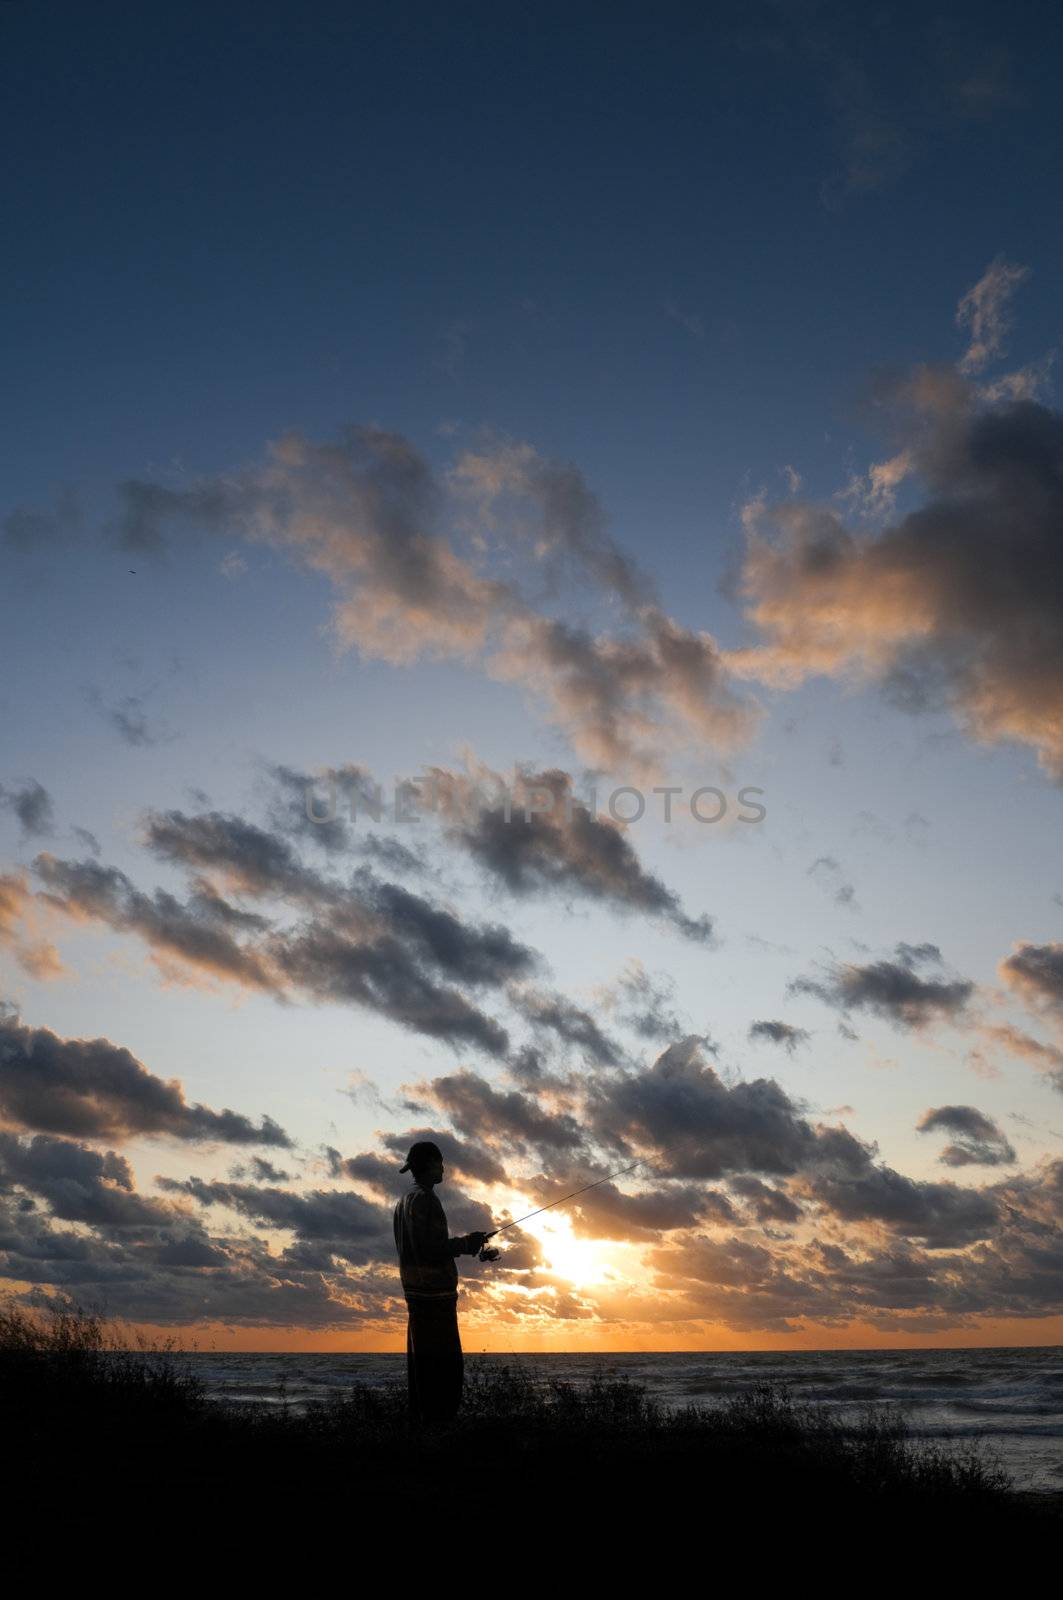 Silhouette of a person walking along the shoreline at sunset in Nova Scotia